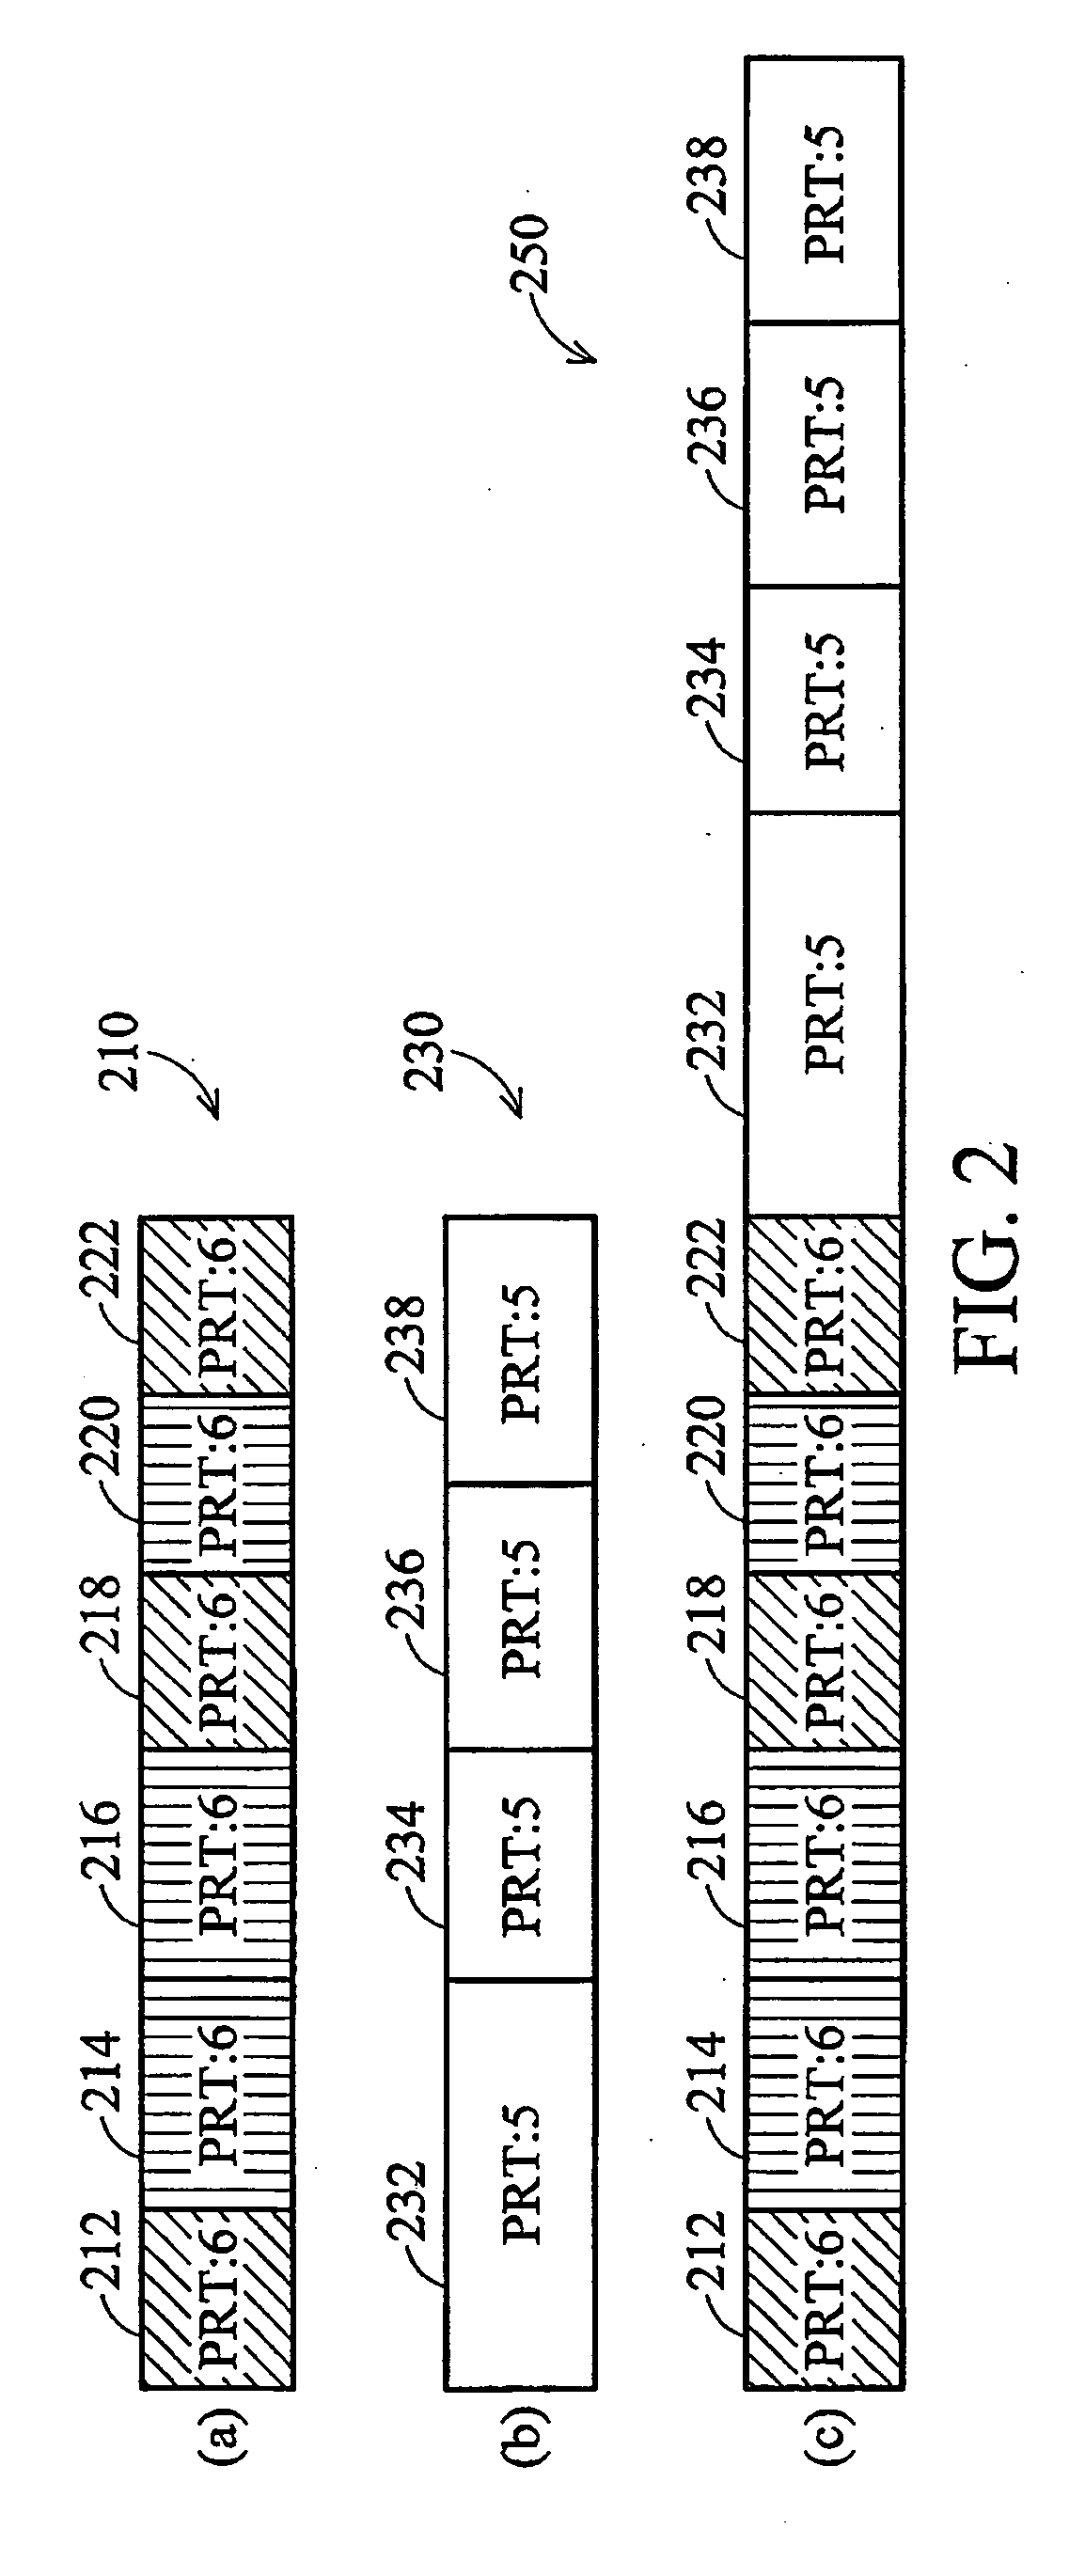 Method for implementing varying grades of service quality in a network switch